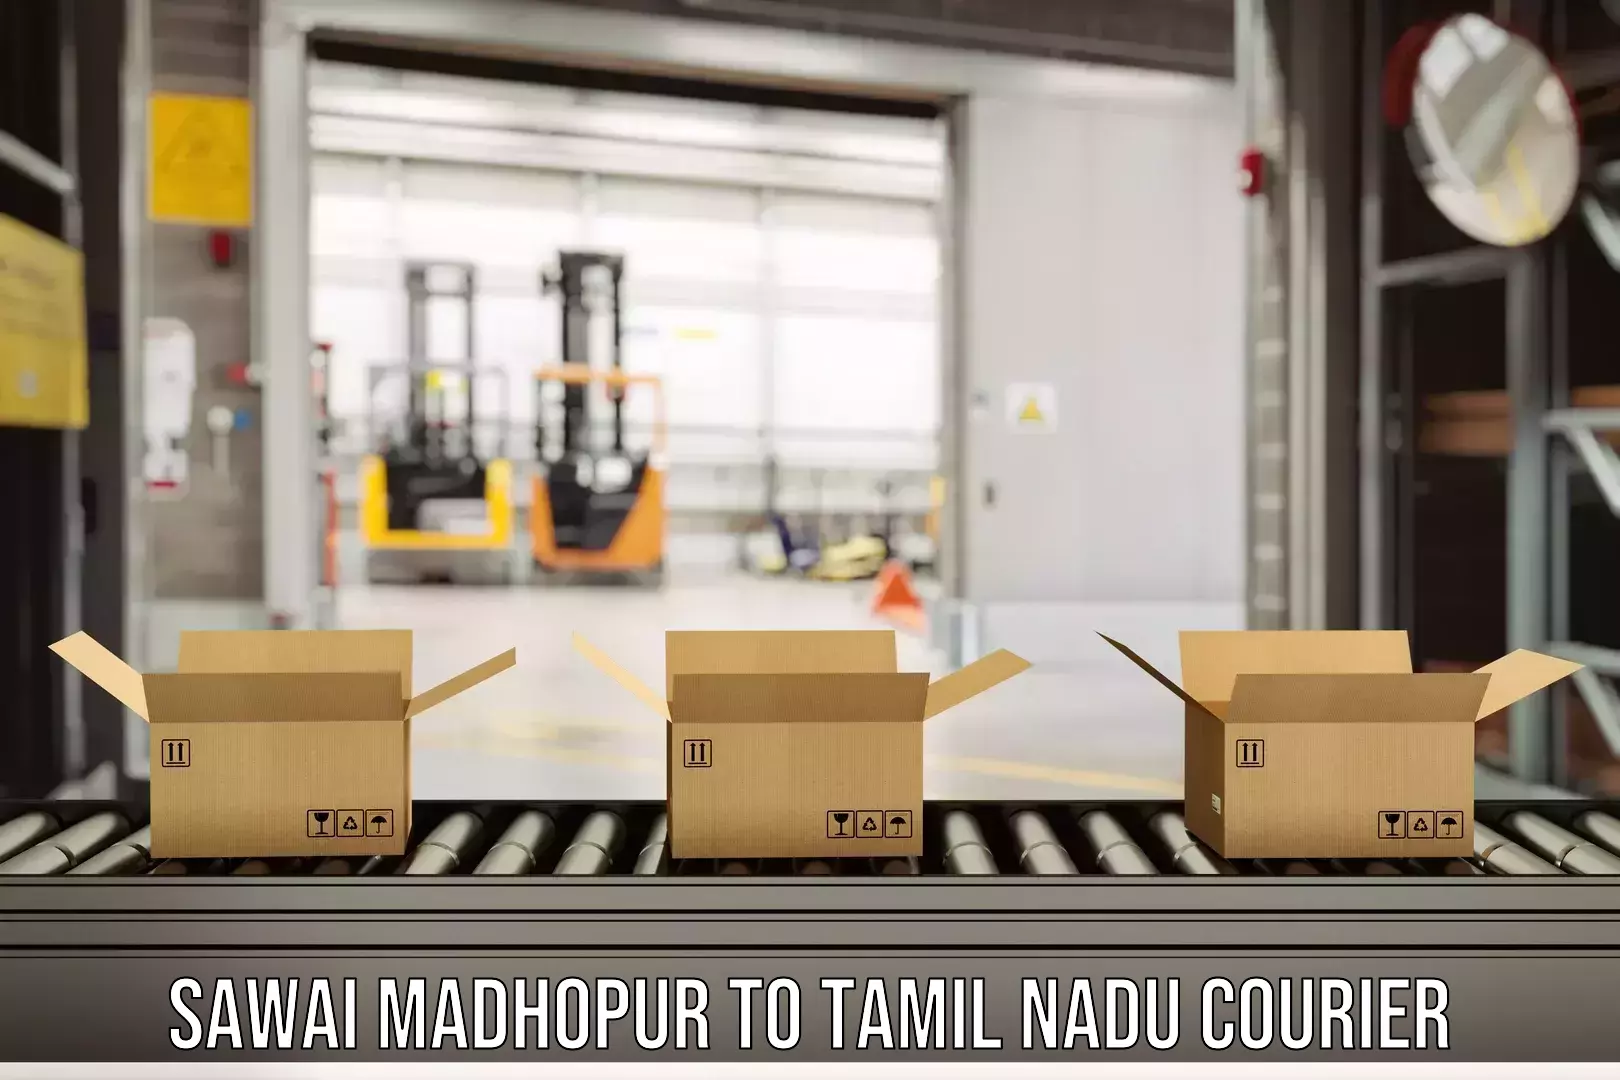 Advanced courier platforms Sawai Madhopur to Saveetha Institute of Medical and Technical Sciences Chennai